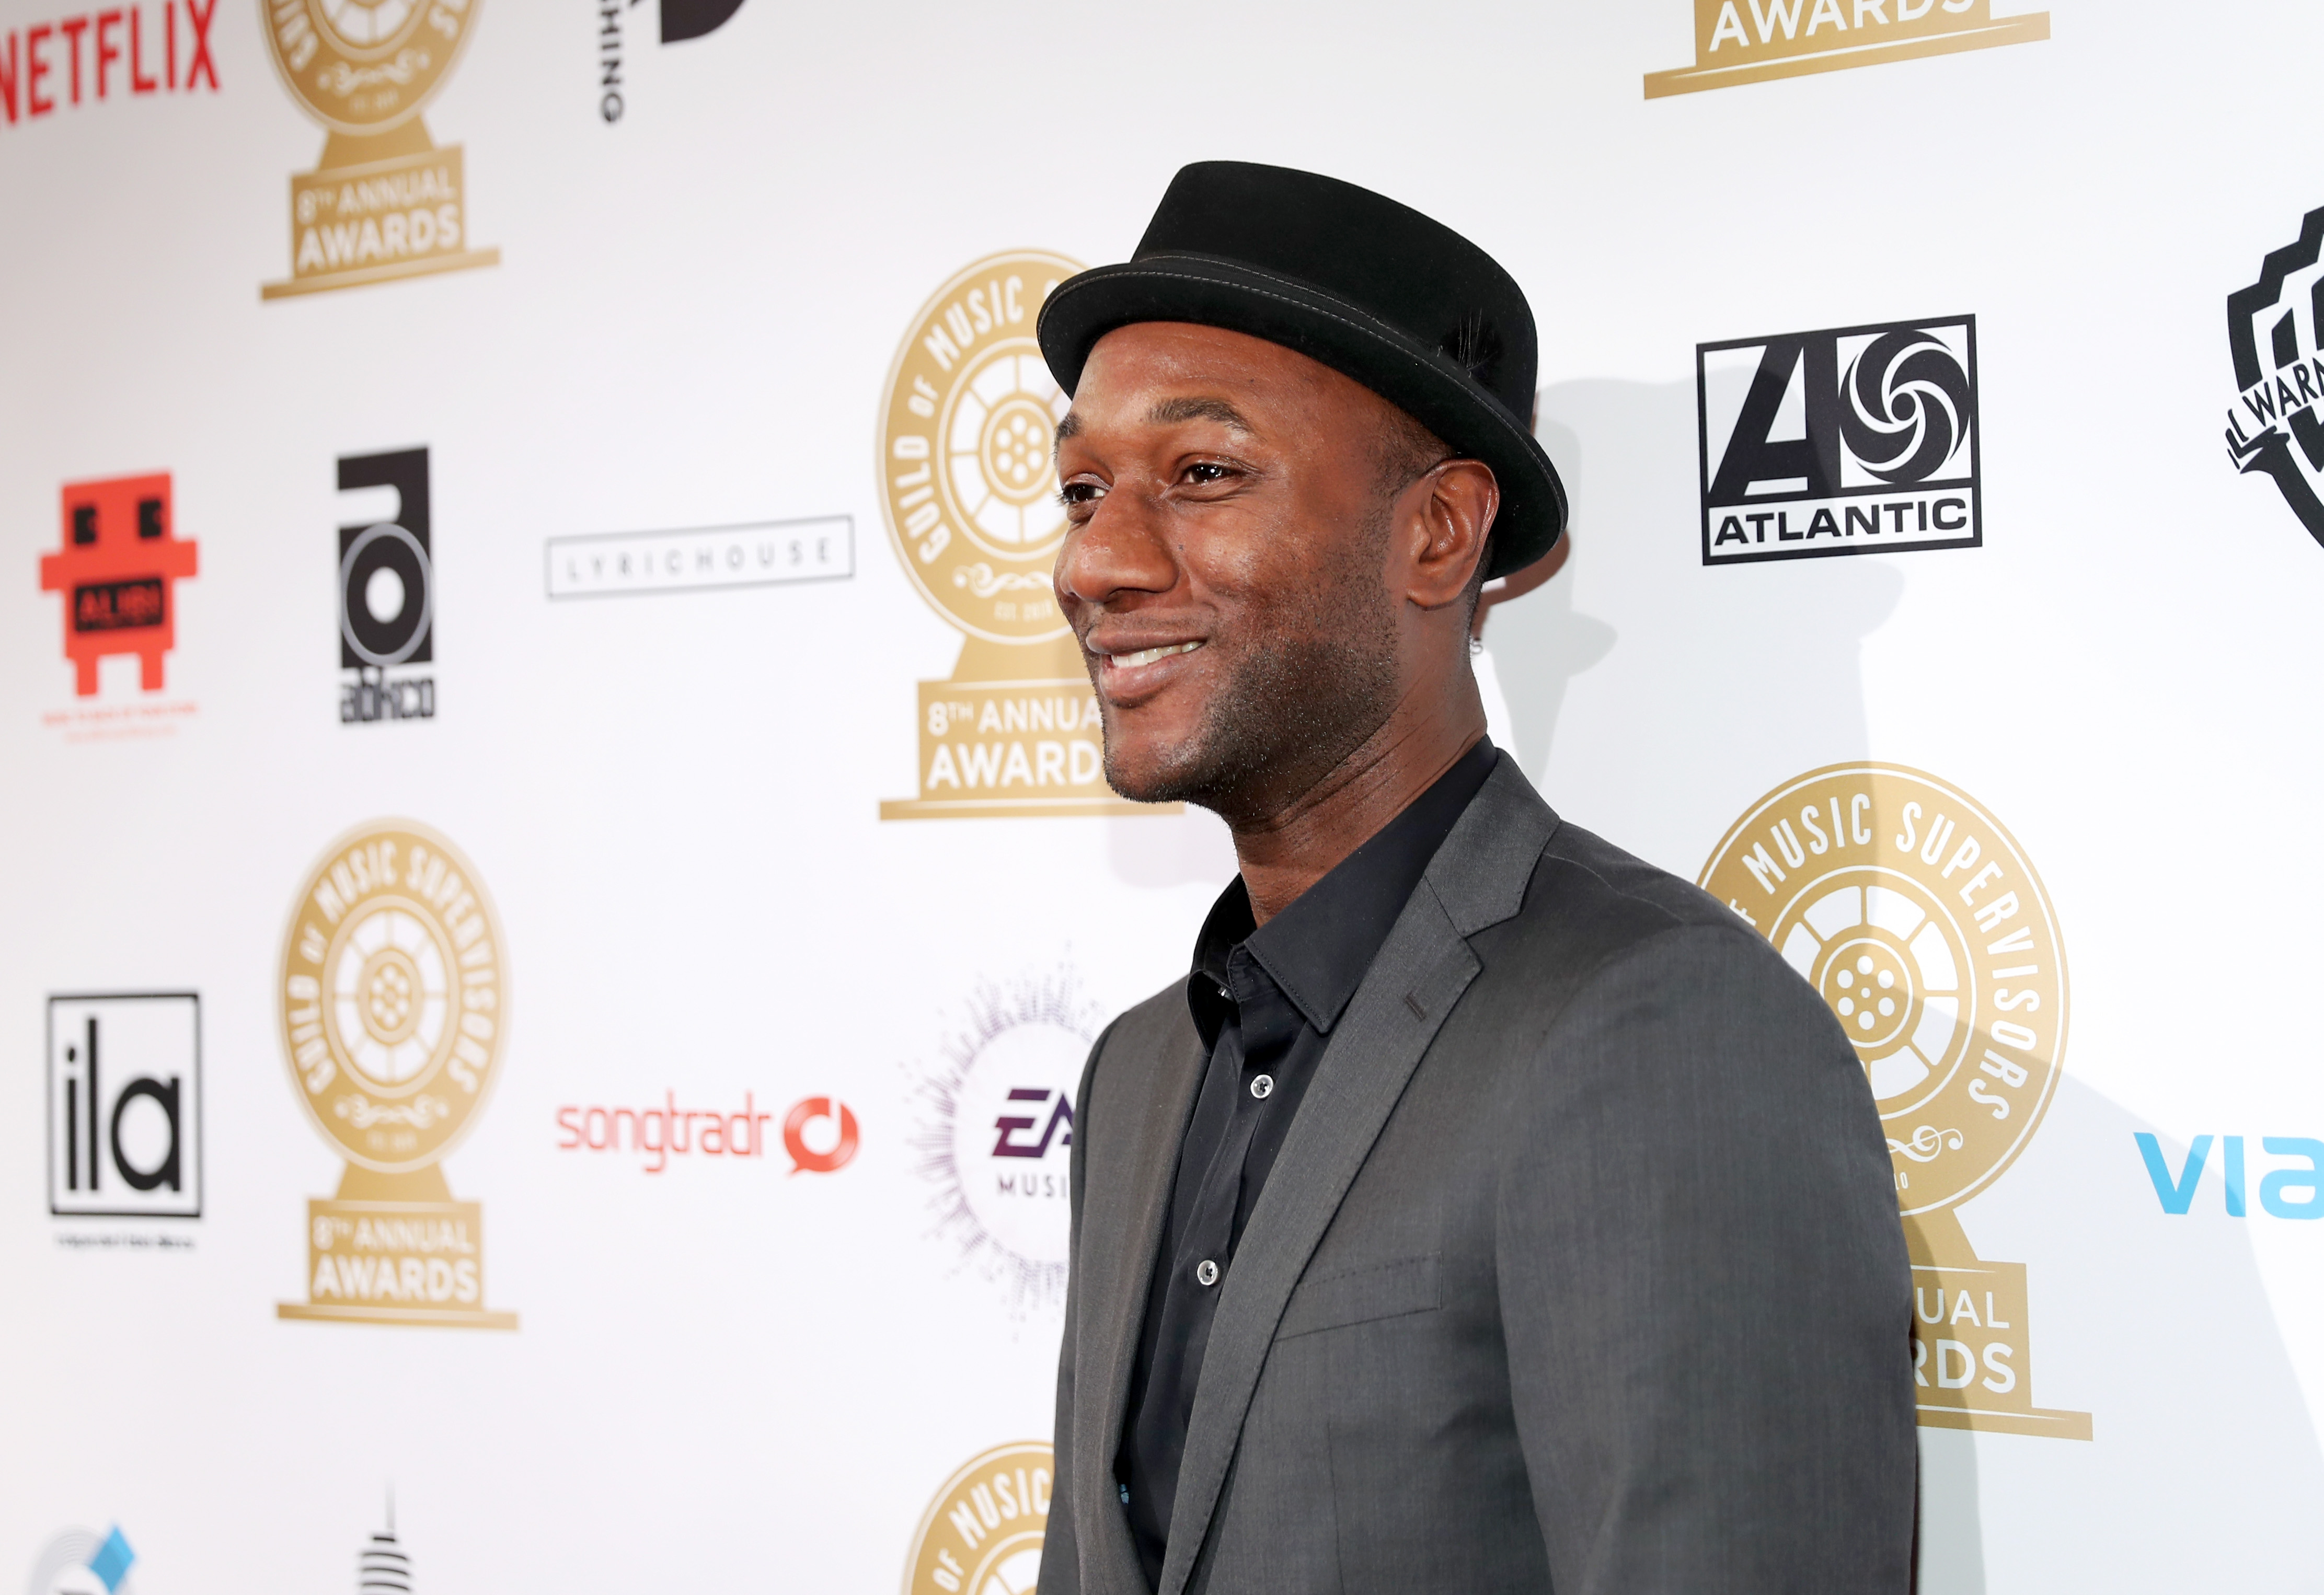 Aloe Blacc Drops New Single 'My Way,' Announces First Album in 7 Years